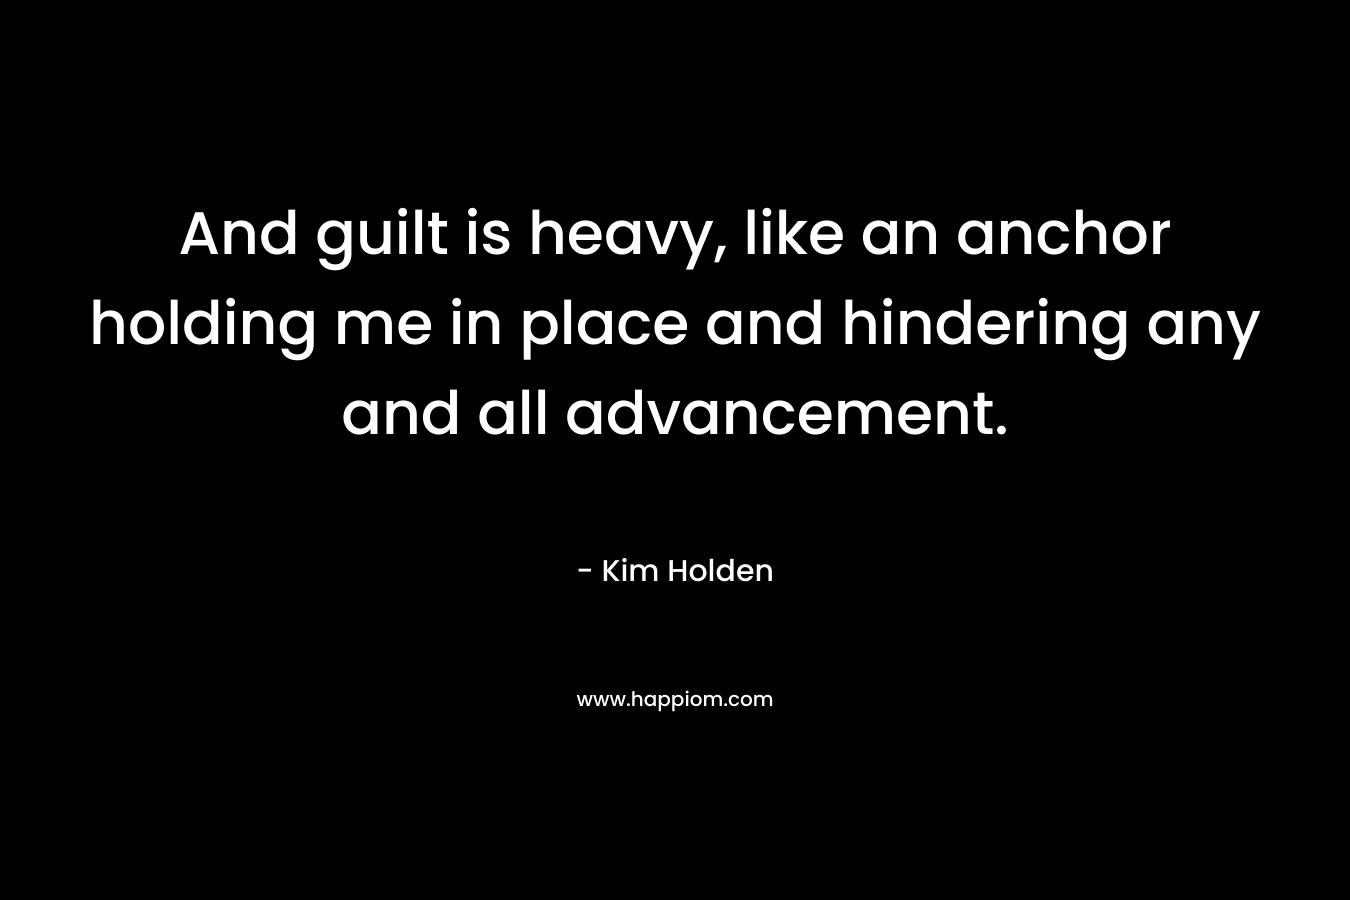 And guilt is heavy, like an anchor holding me in place and hindering any and all advancement.